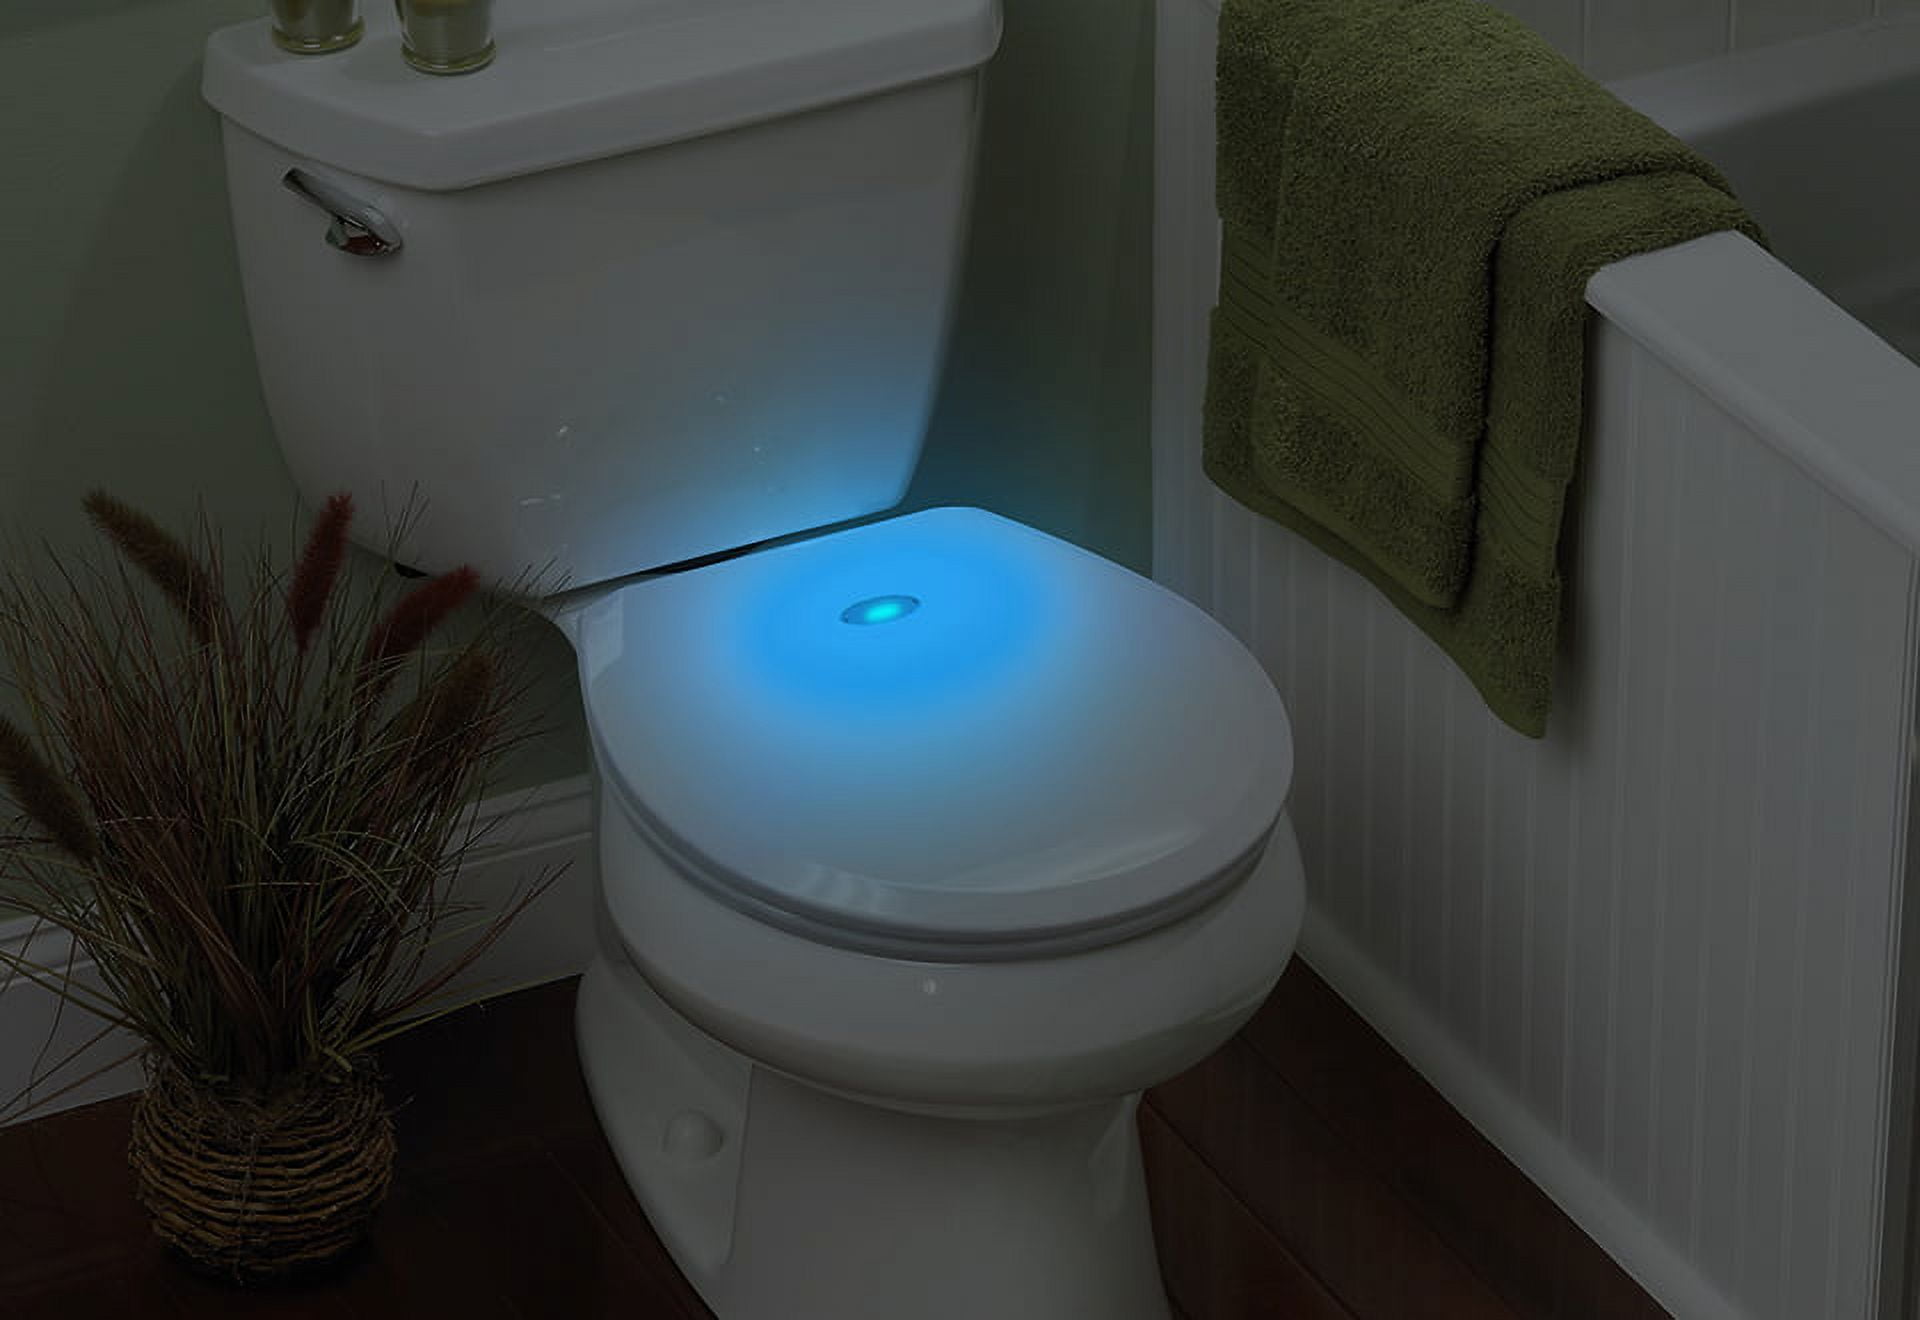 Home + Solutions Nightlight Round White Plastic Toilet Seat at